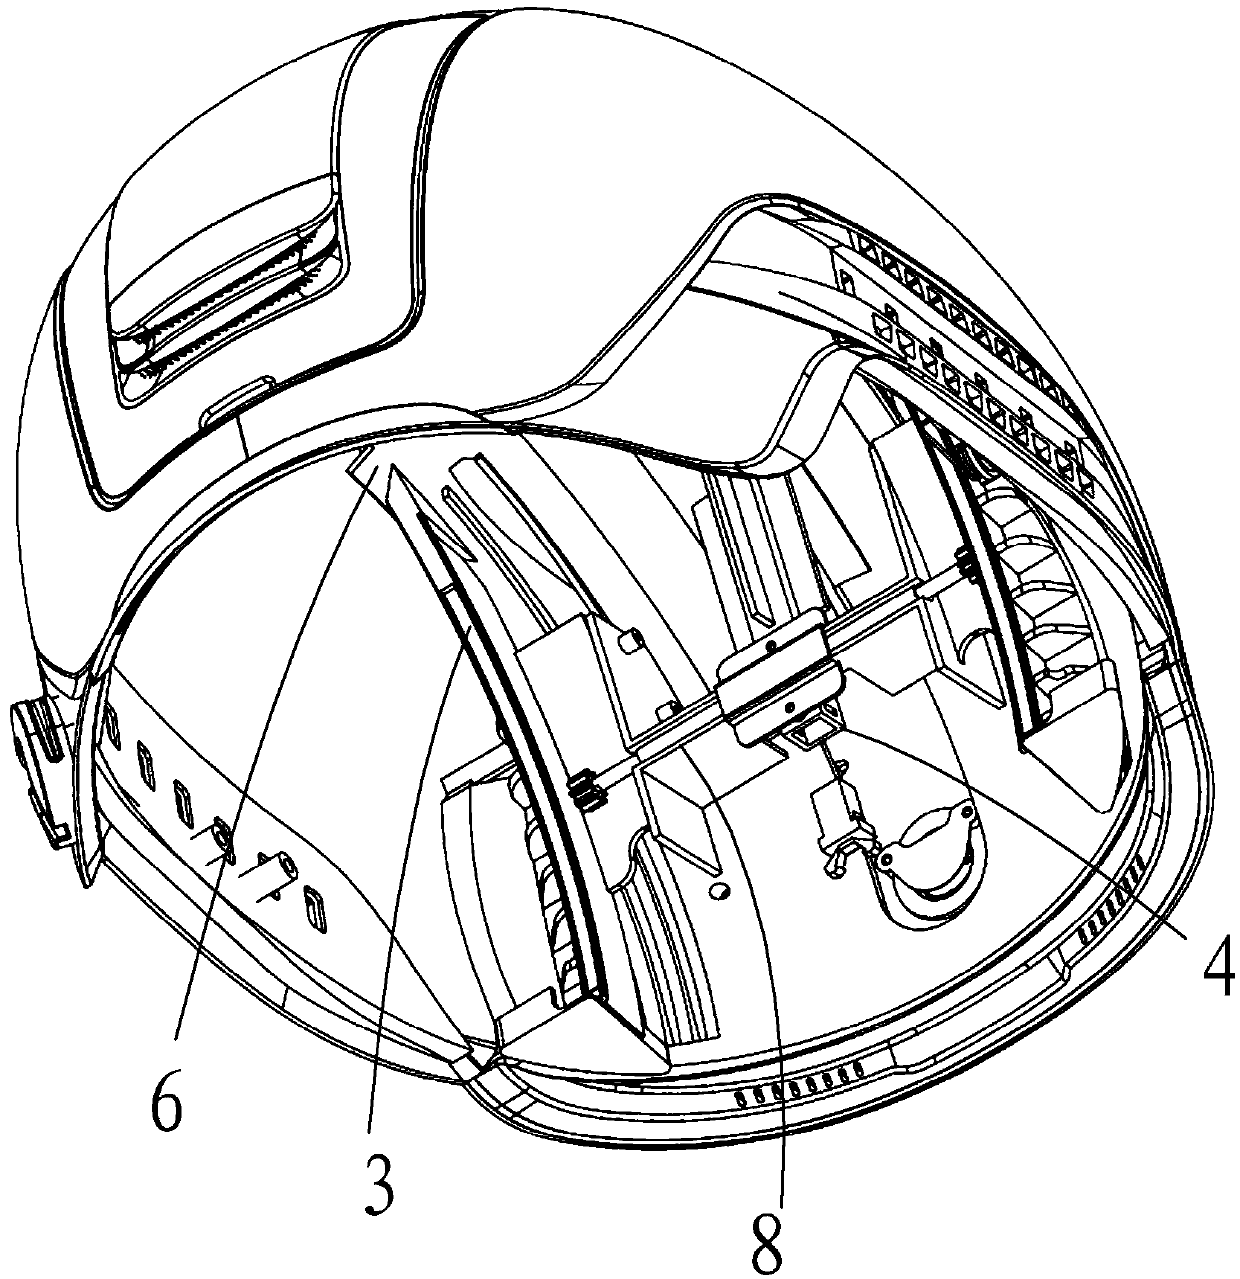 Video module storage structure and helmet